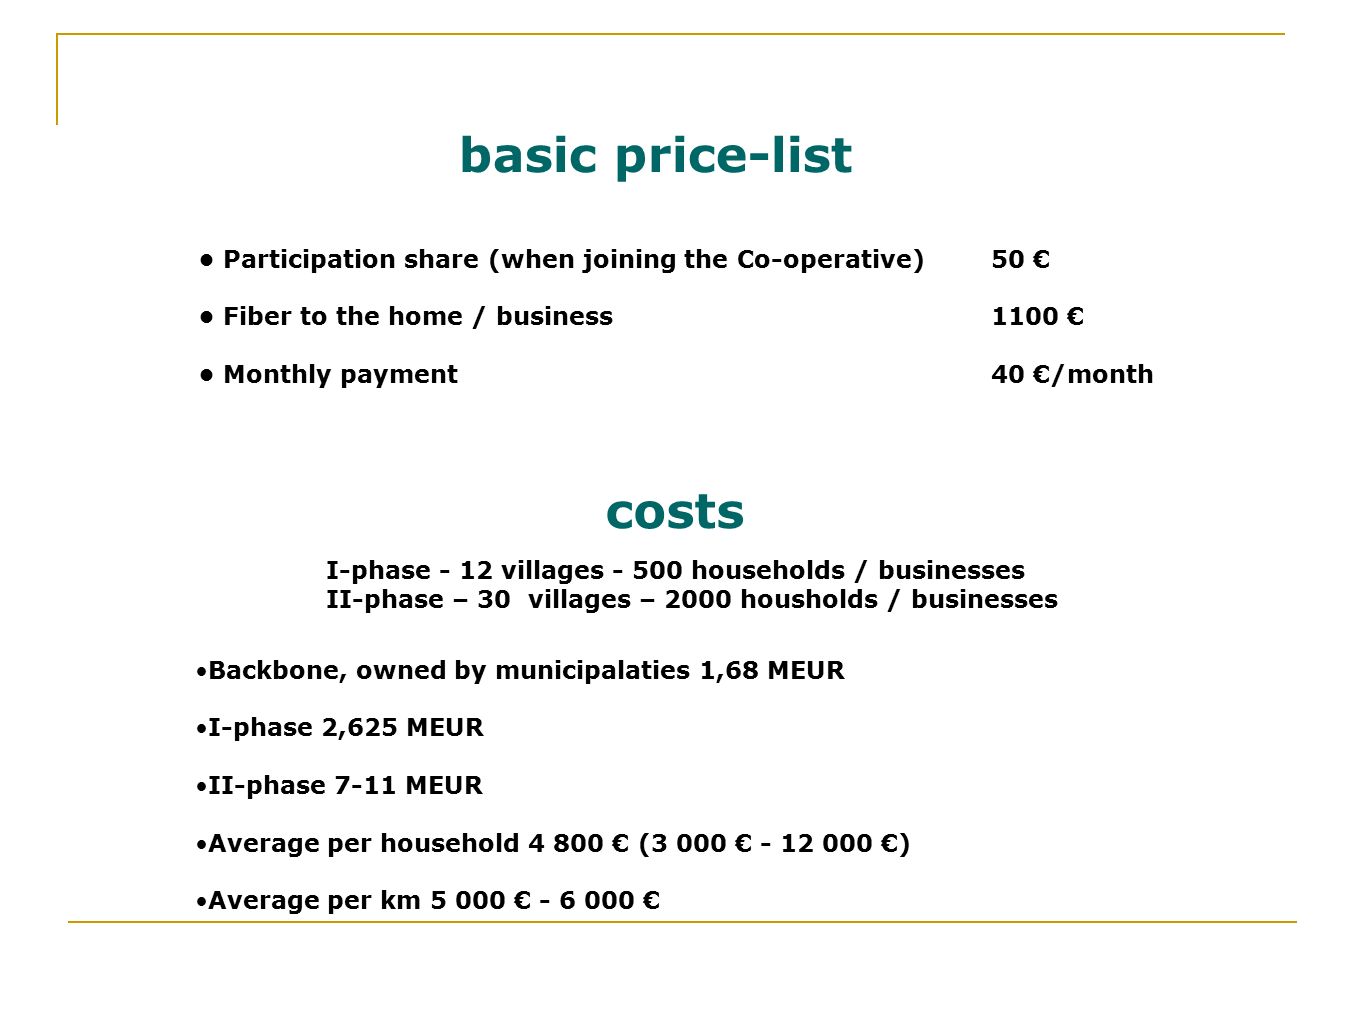 Backbone, owned by municipalaties 1,68 MEUR I-phase 2,625 MEUR II-phase 7-11 MEUR Average per household € (3 000 € €) Average per km € € Backbone, owned by municipalaties 1,68 MEUR I-phase 2,625 MEUR II-phase 7-11 MEUR Average per household € (3 000 € €) Average per km € € costs Participation share (when joining the Co-operative) Fiber to the home / business Monthly payment Participation share (when joining the Co-operative) Fiber to the home / business Monthly payment basic price-list 50 € 1100 € 40 €/month 50 € 1100 € 40 €/month I-phase - 12 villages households / businesses II-phase – 30 villages – 2000 housholds / businesses I-phase - 12 villages households / businesses II-phase – 30 villages – 2000 housholds / businesses